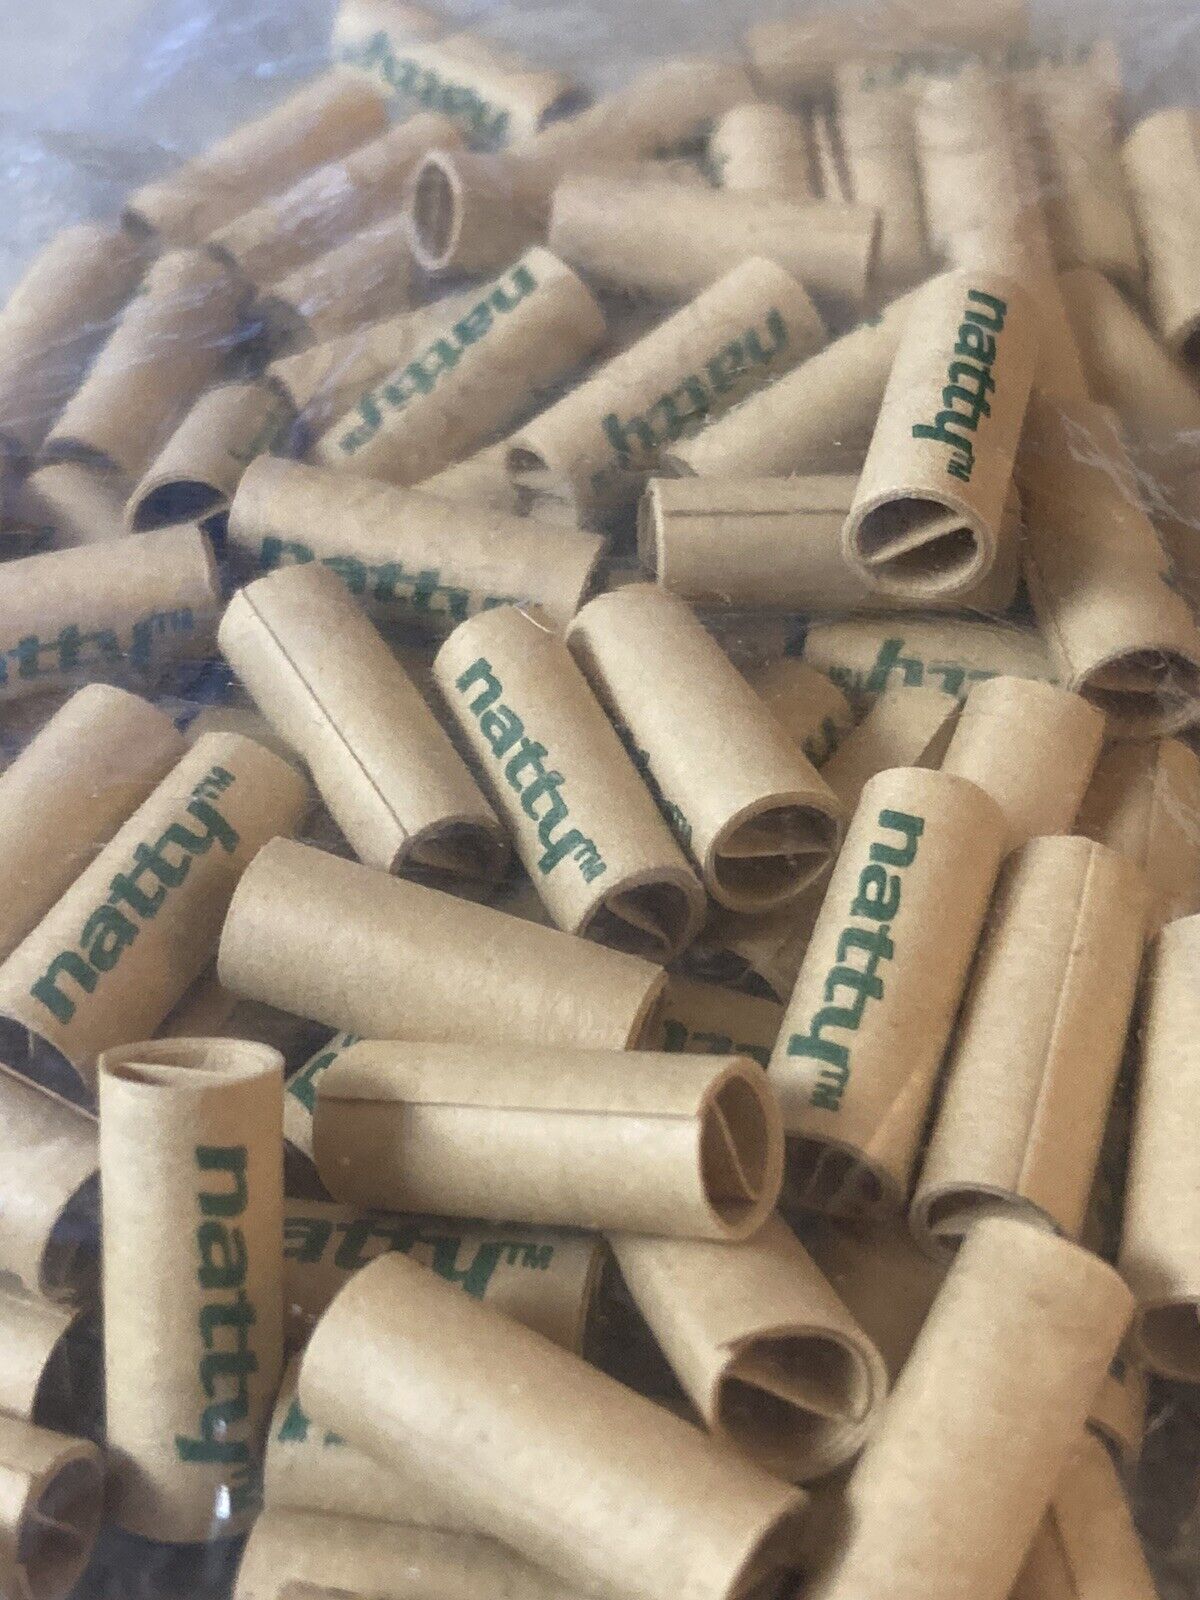 100+ Natty Pre-Rolled Cigarette Filter Tips 7mm x 18mm All Natural Organic